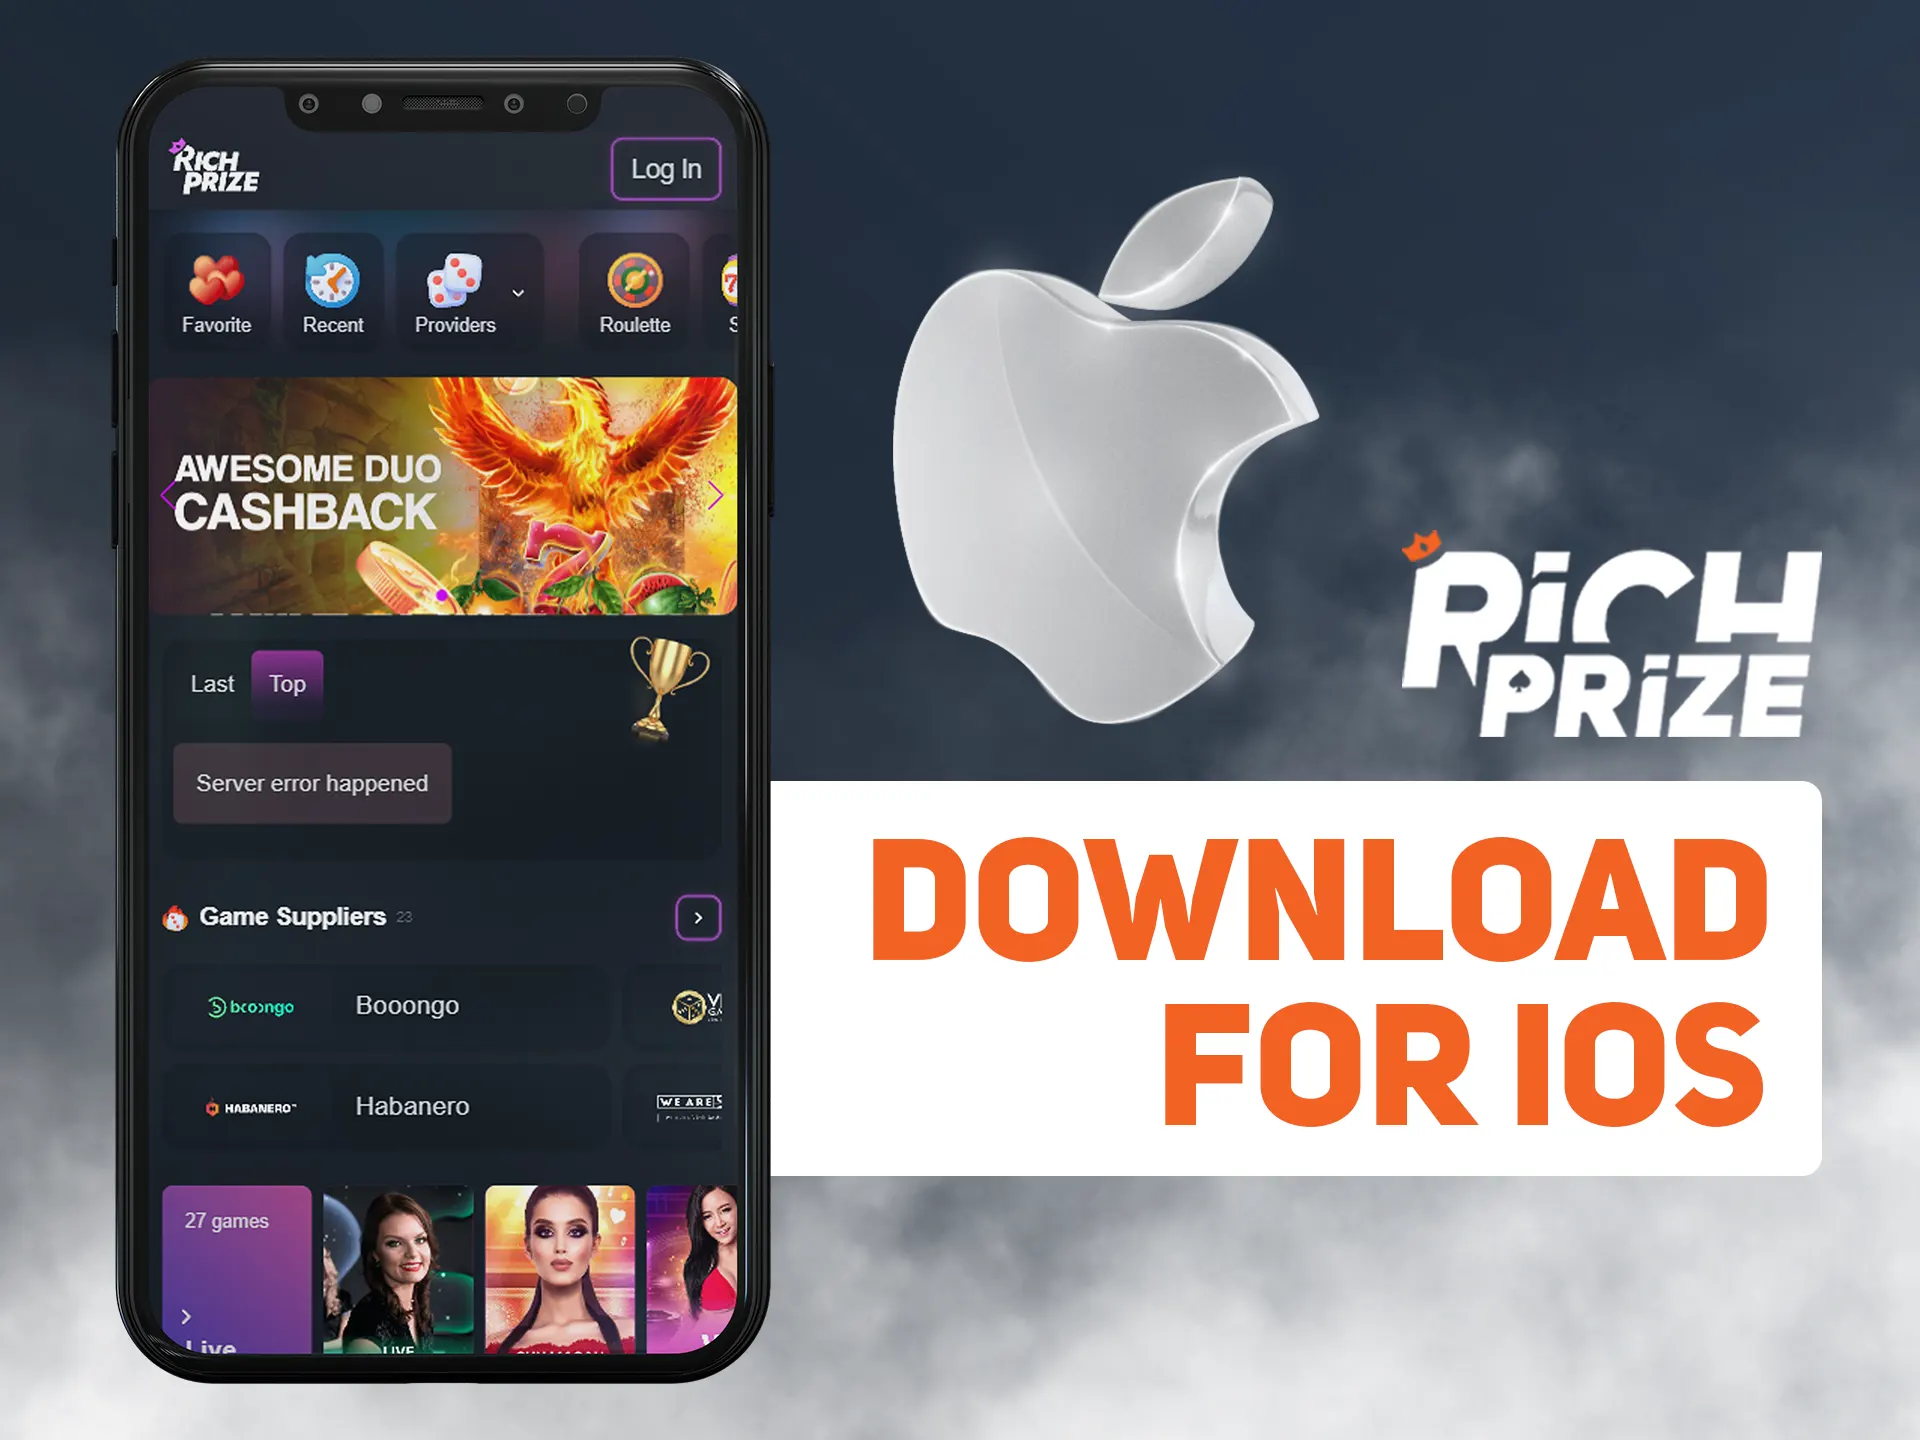 Install Richprize app on your ios device.